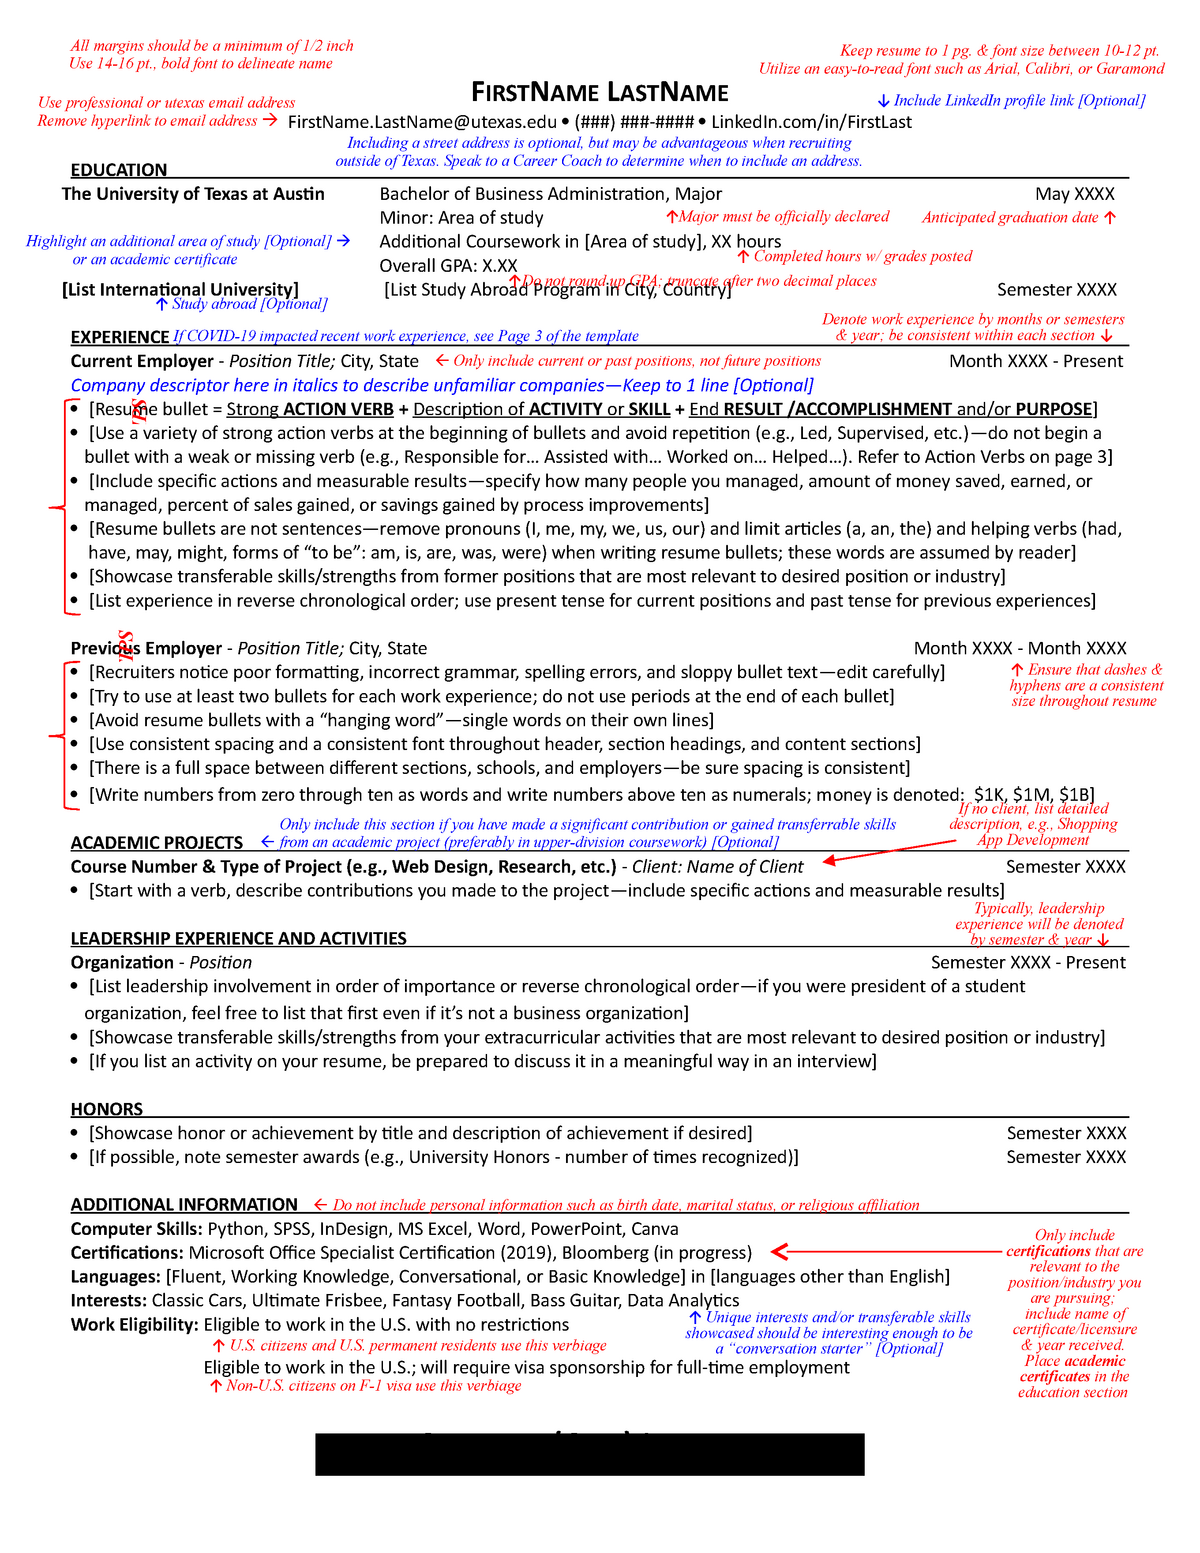 recruit-mc-combs-bba-resume-template-firstname-lastname-firstname